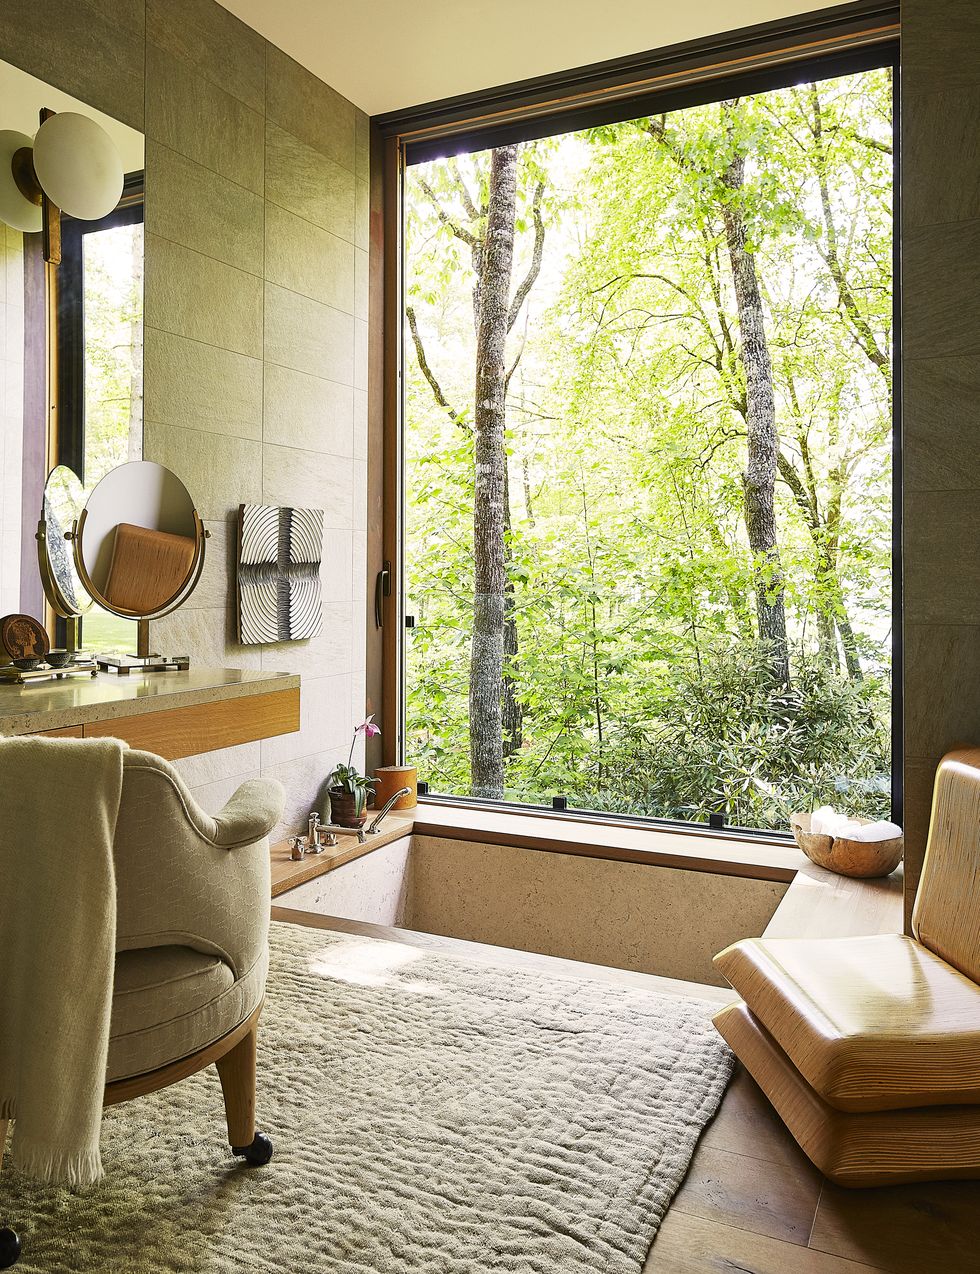 15 Easy Spa Bathroom Ideas to Try Today